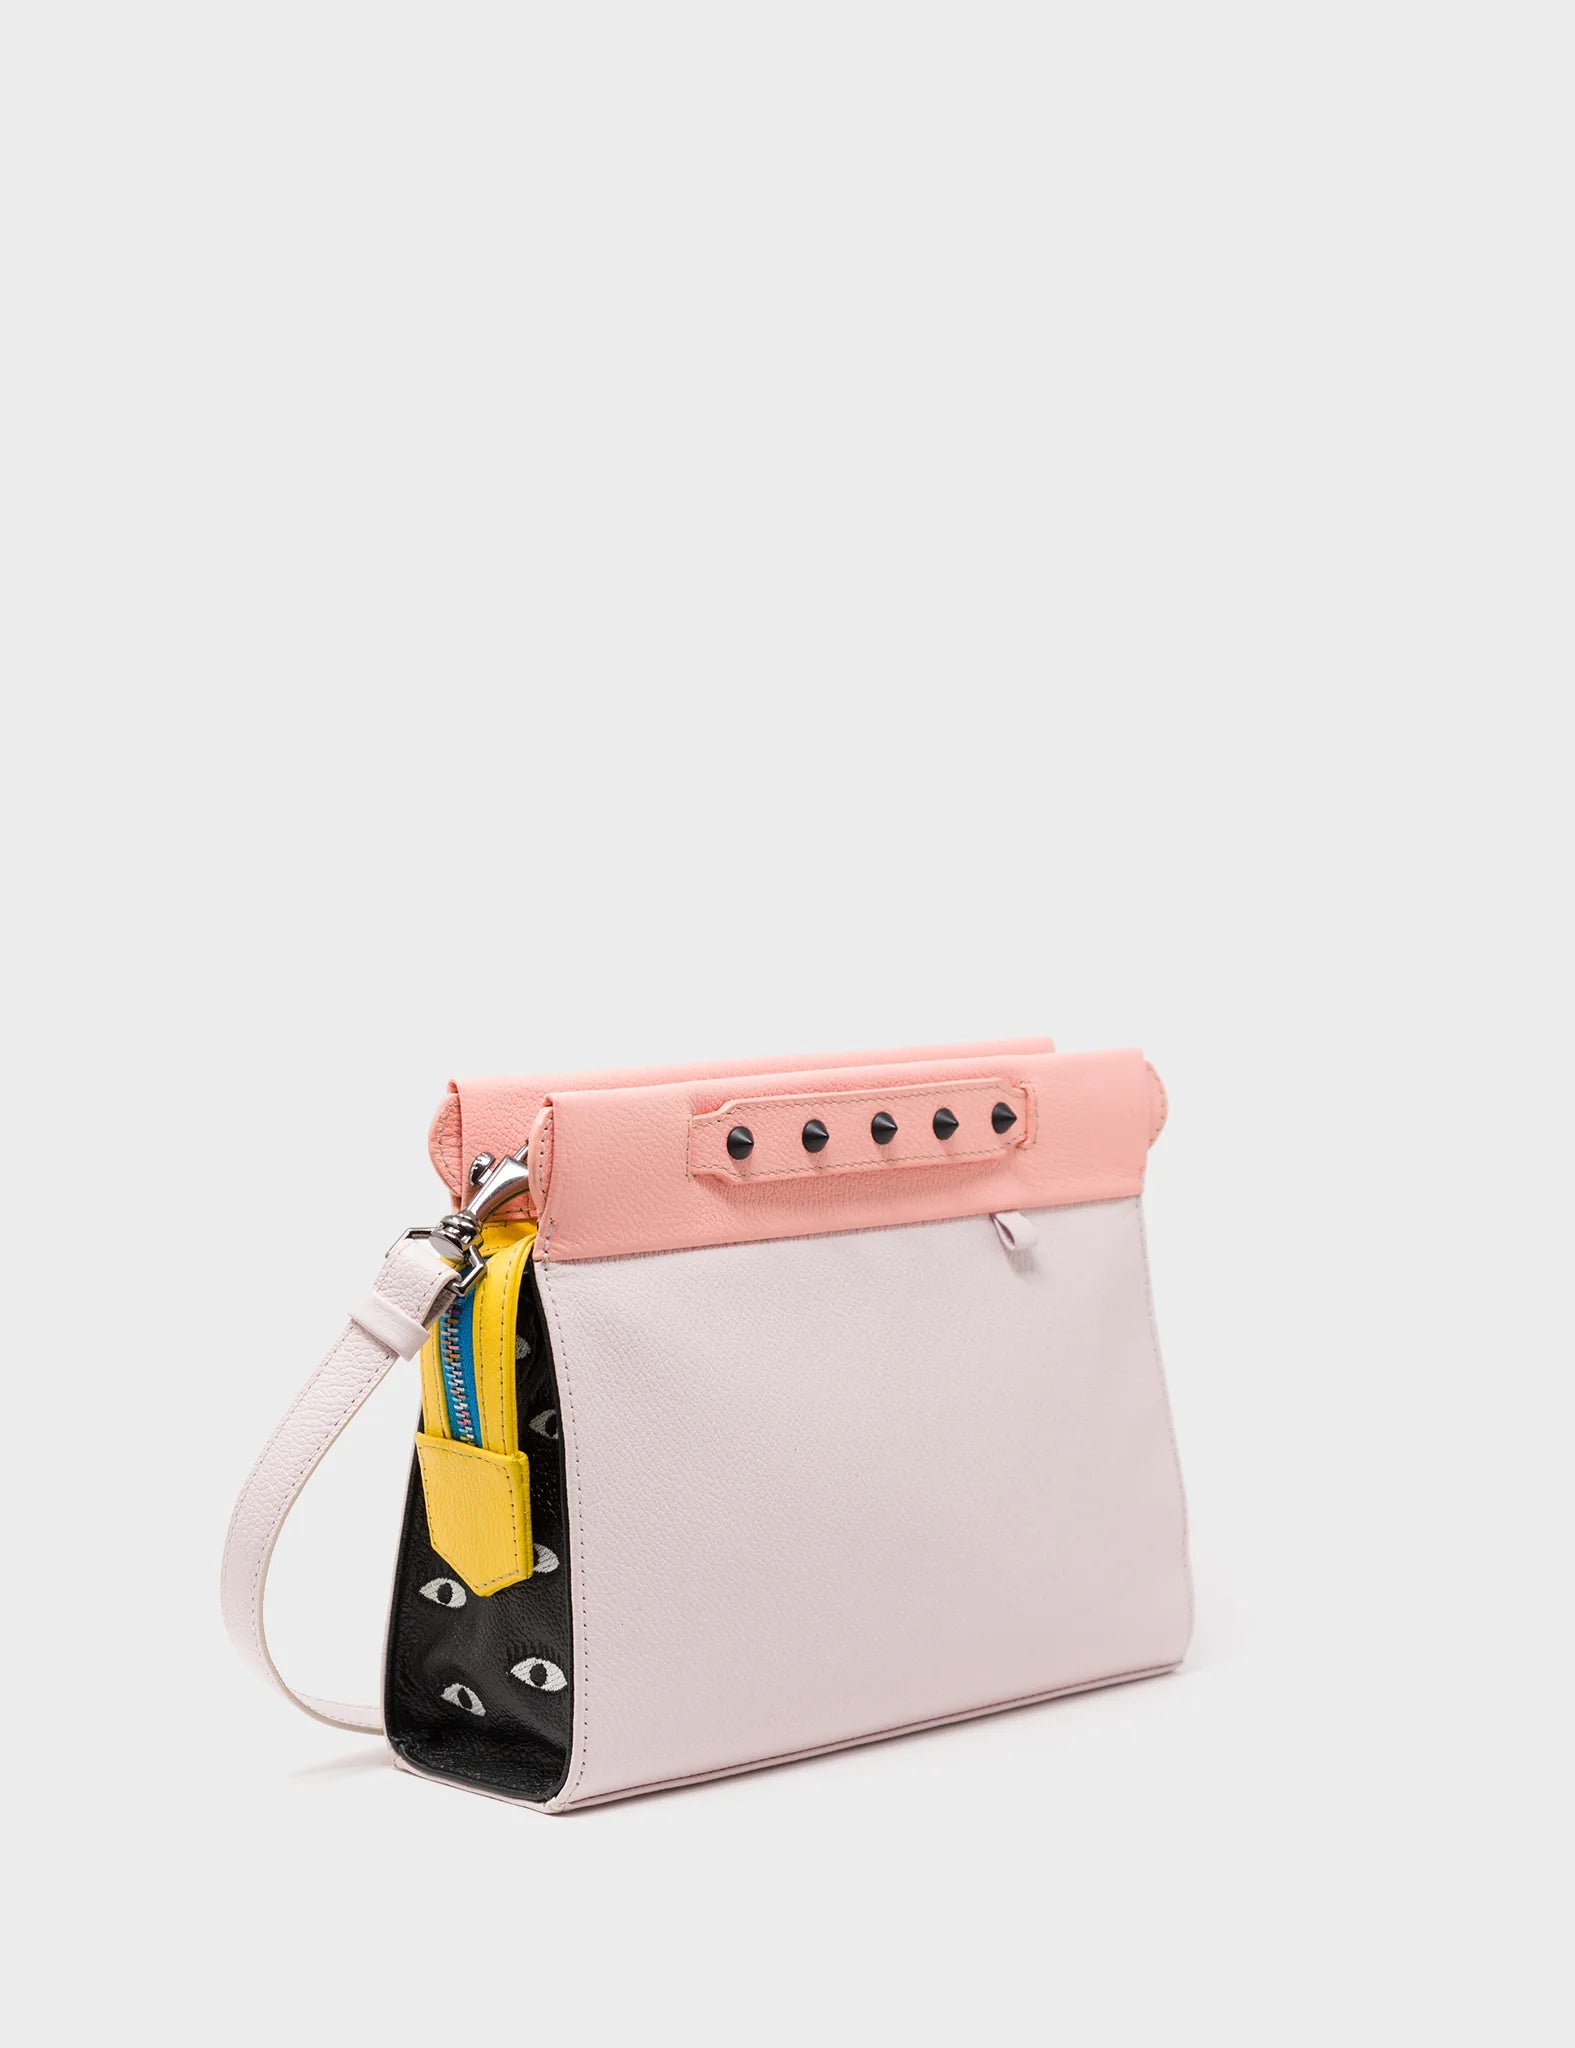 Crossbody Powder Pink Leather Bag Eyes Embroidery multicolored zipper